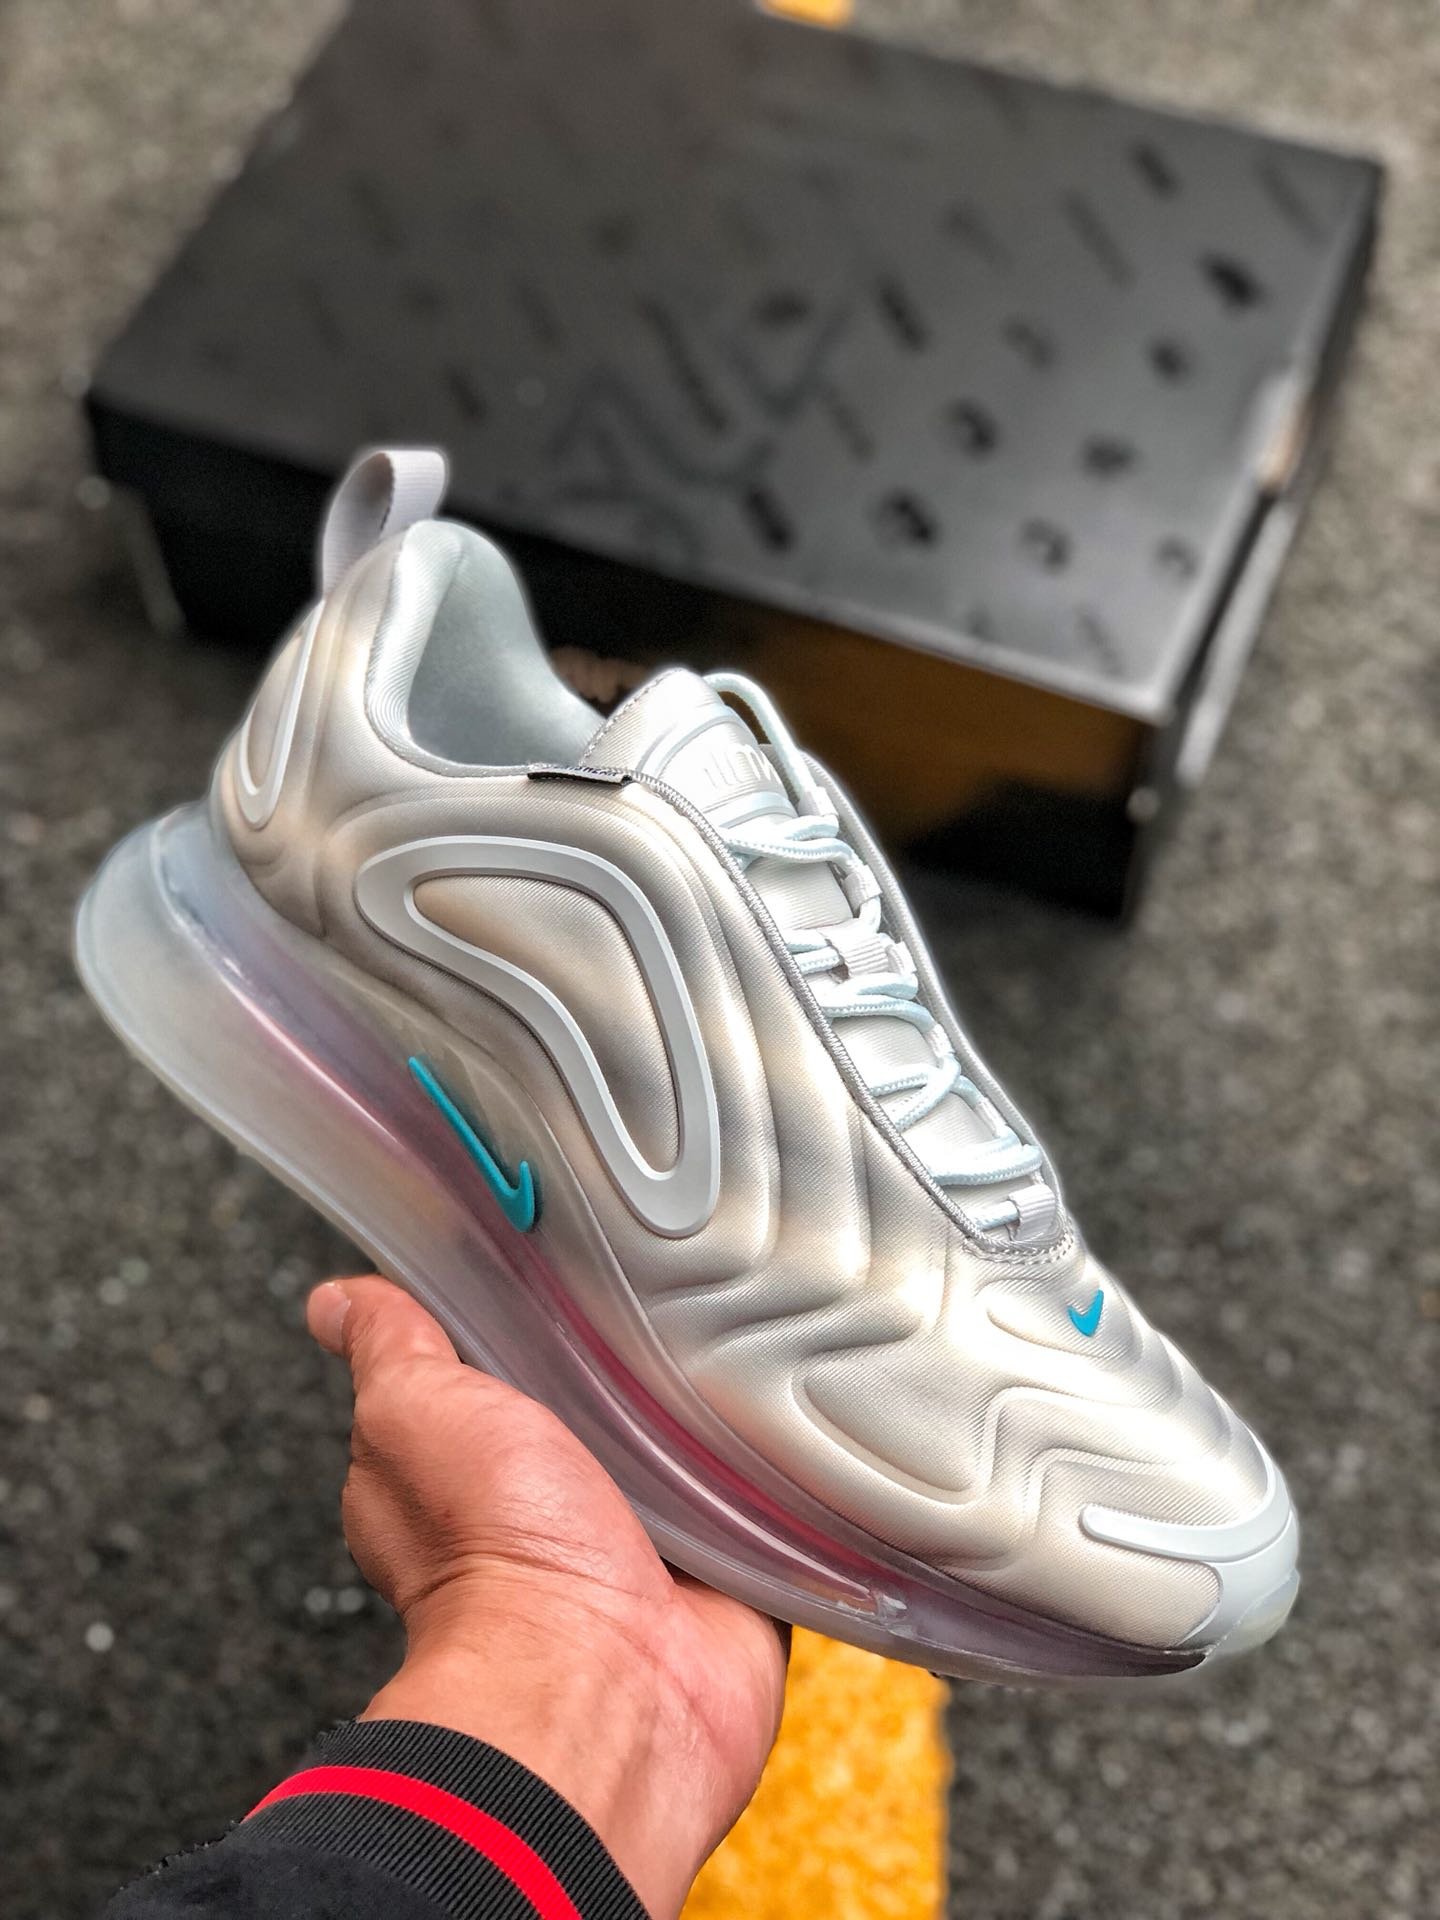 Nike Air Max 720 Wolf Grey/Red Orbit-White-Teal Nebula For Sale ...